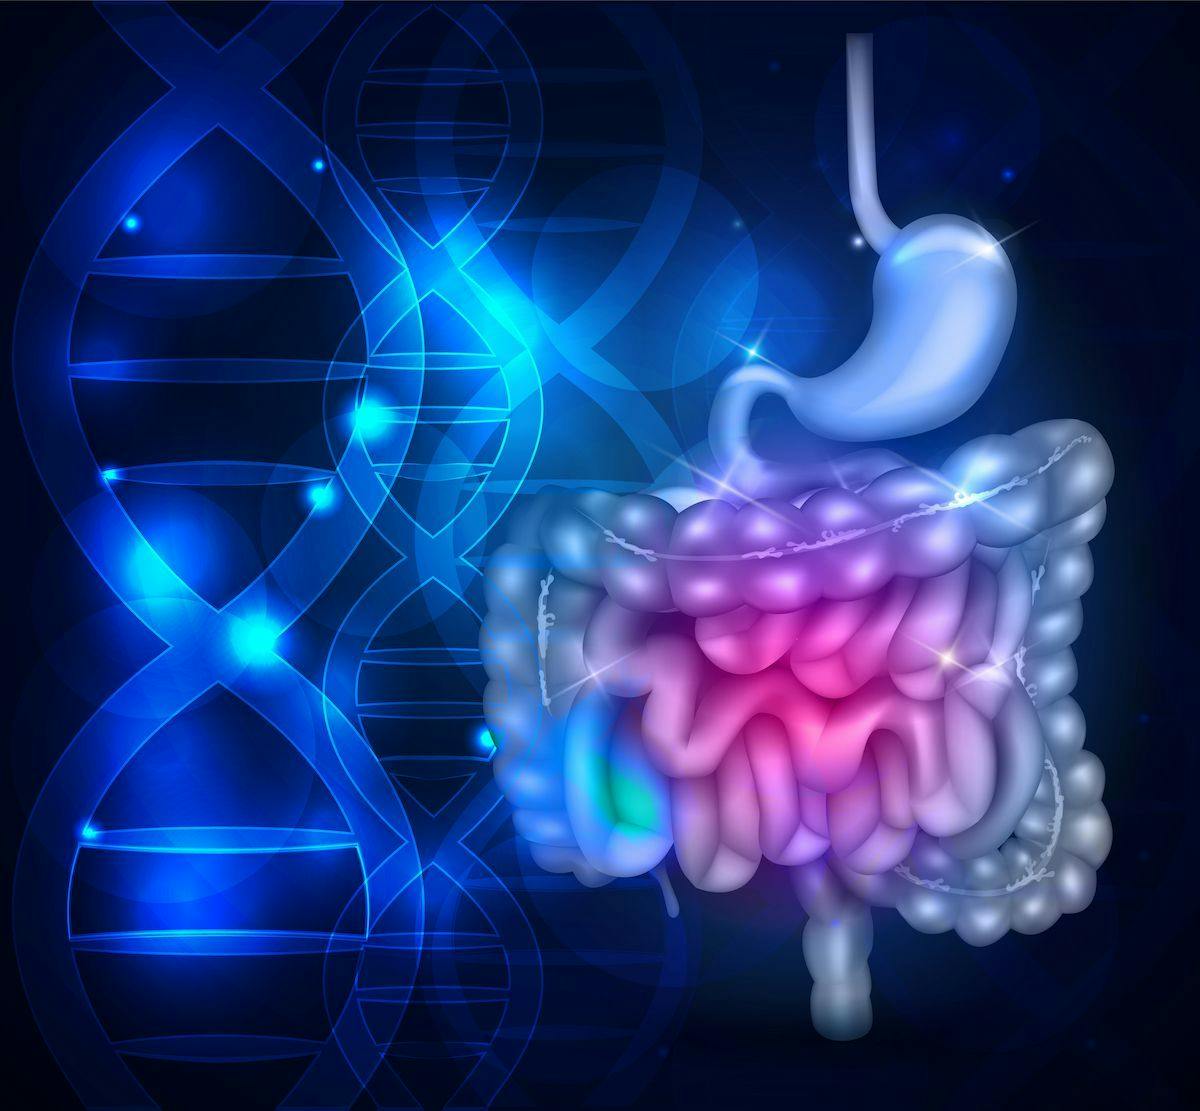 Findings from the phase 3 FRESCO-2 trial support fruquintinib’s potential to provide an improved survival benefit and quality of life for those with previously treated metastatic colorectal cancer.